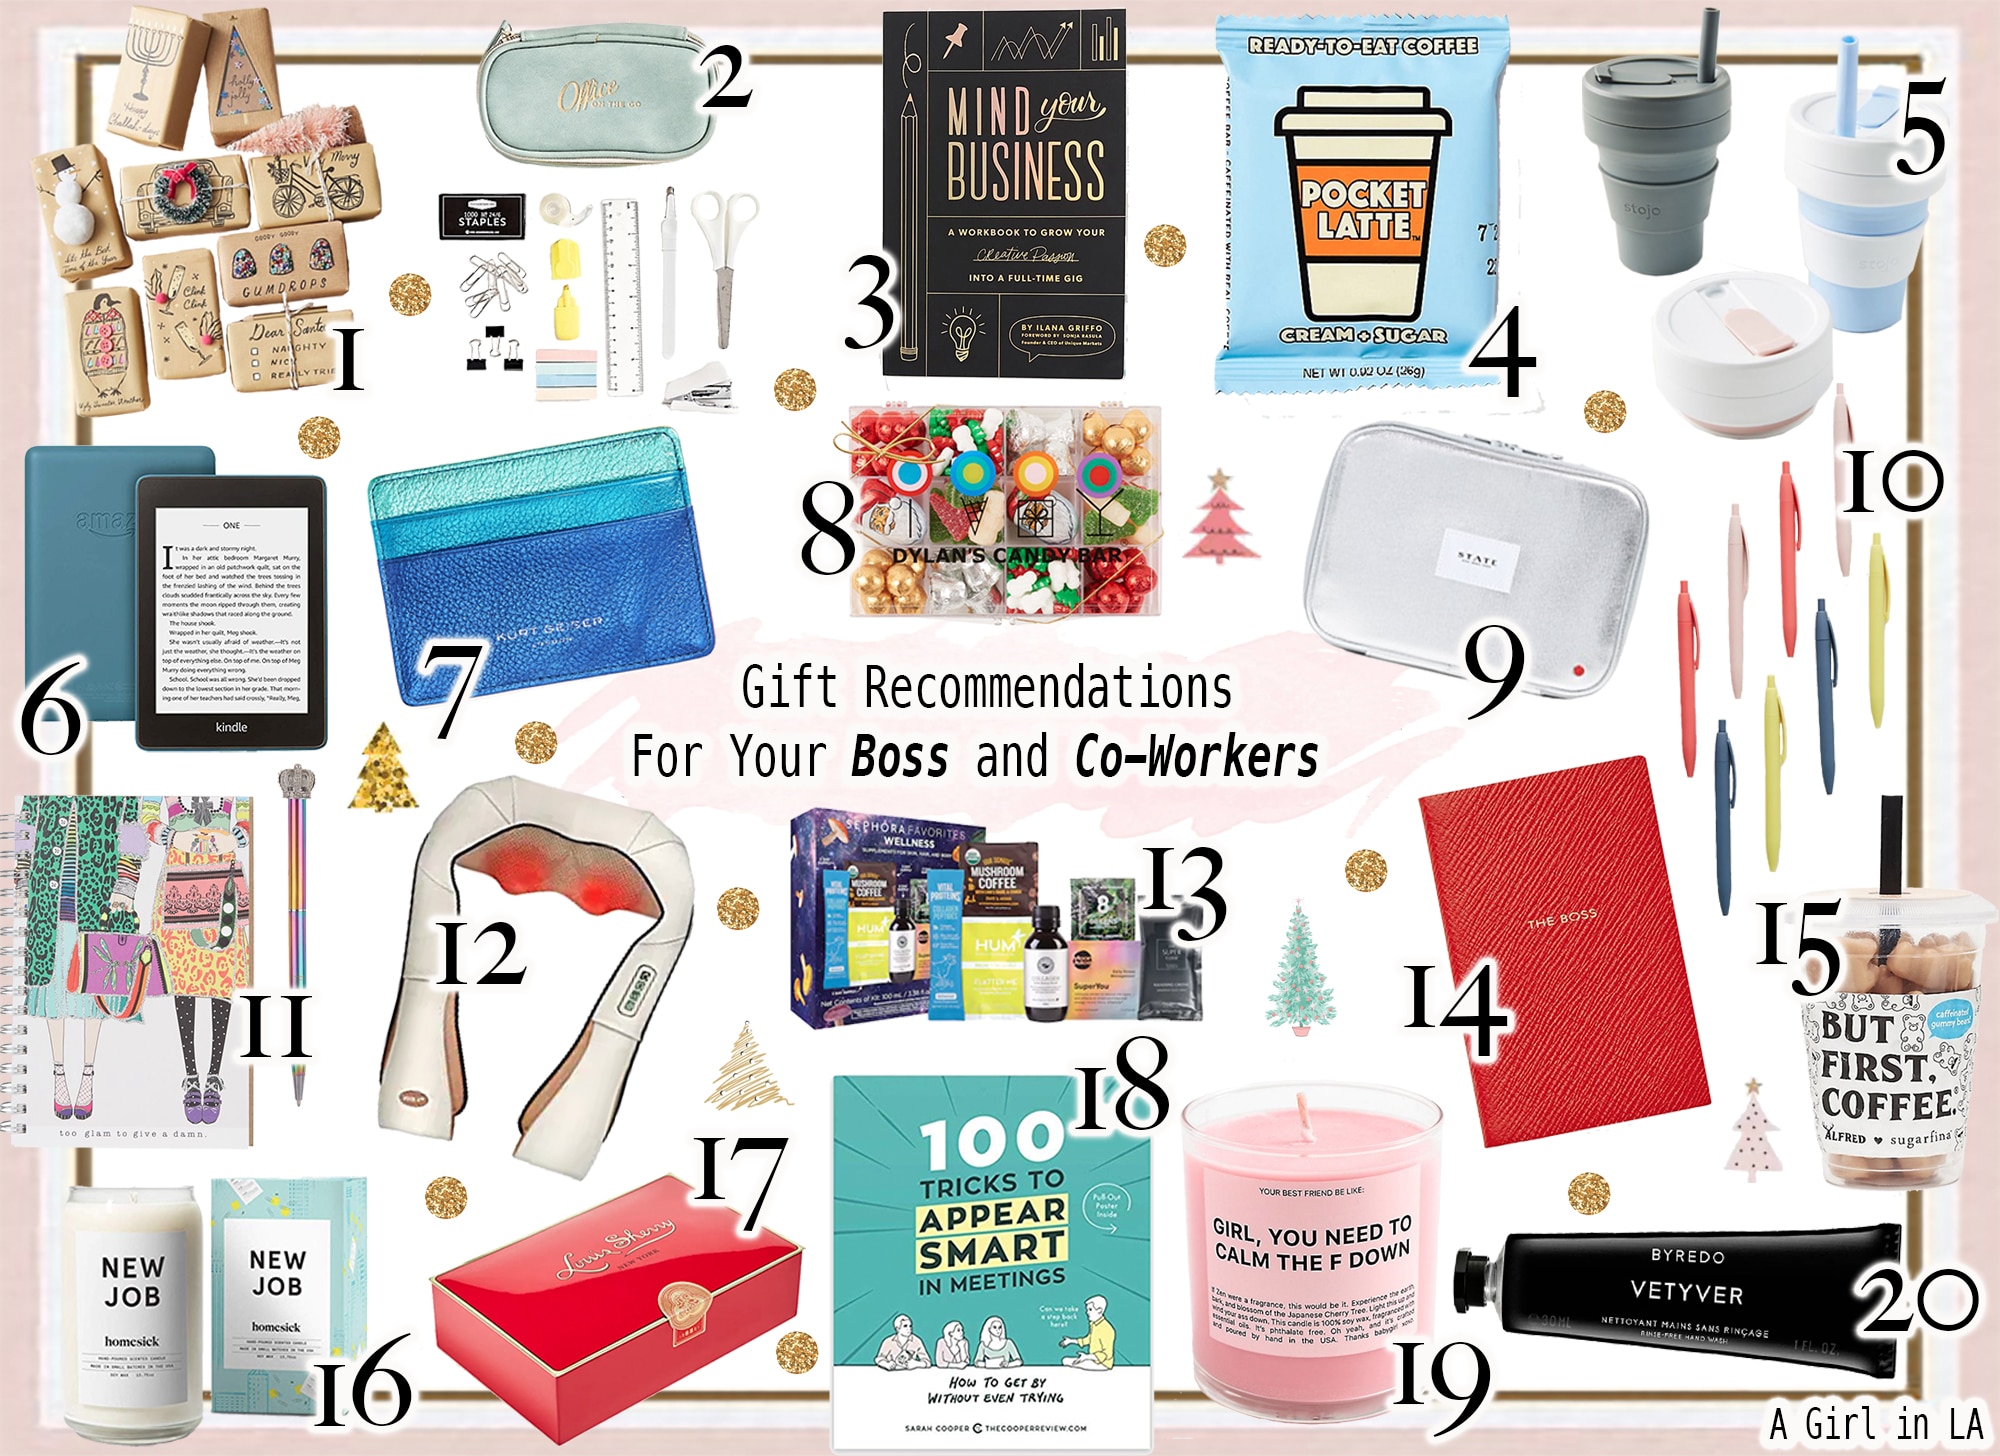 Gift Recommendations For Your Boss and Co-Workers